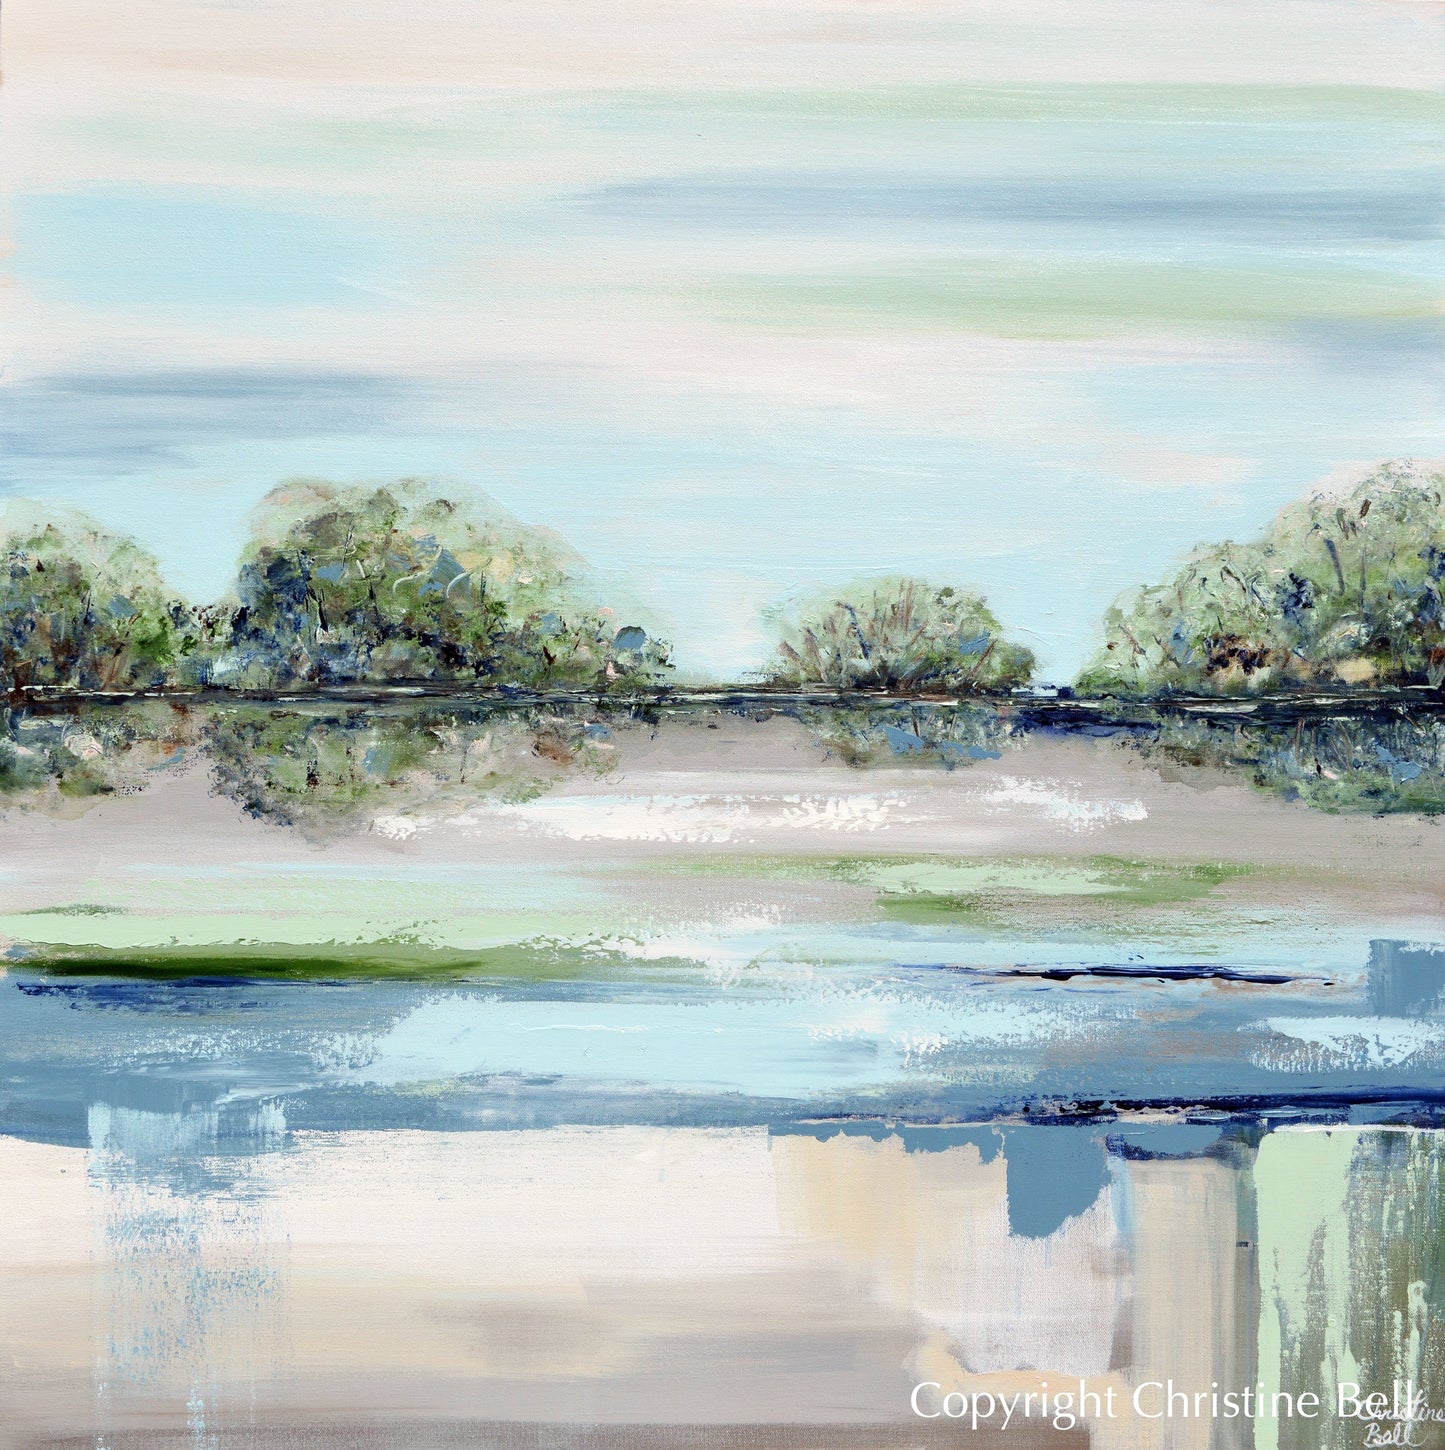 Art in a Mat Watercolor Painting Forest Reflection on Water 